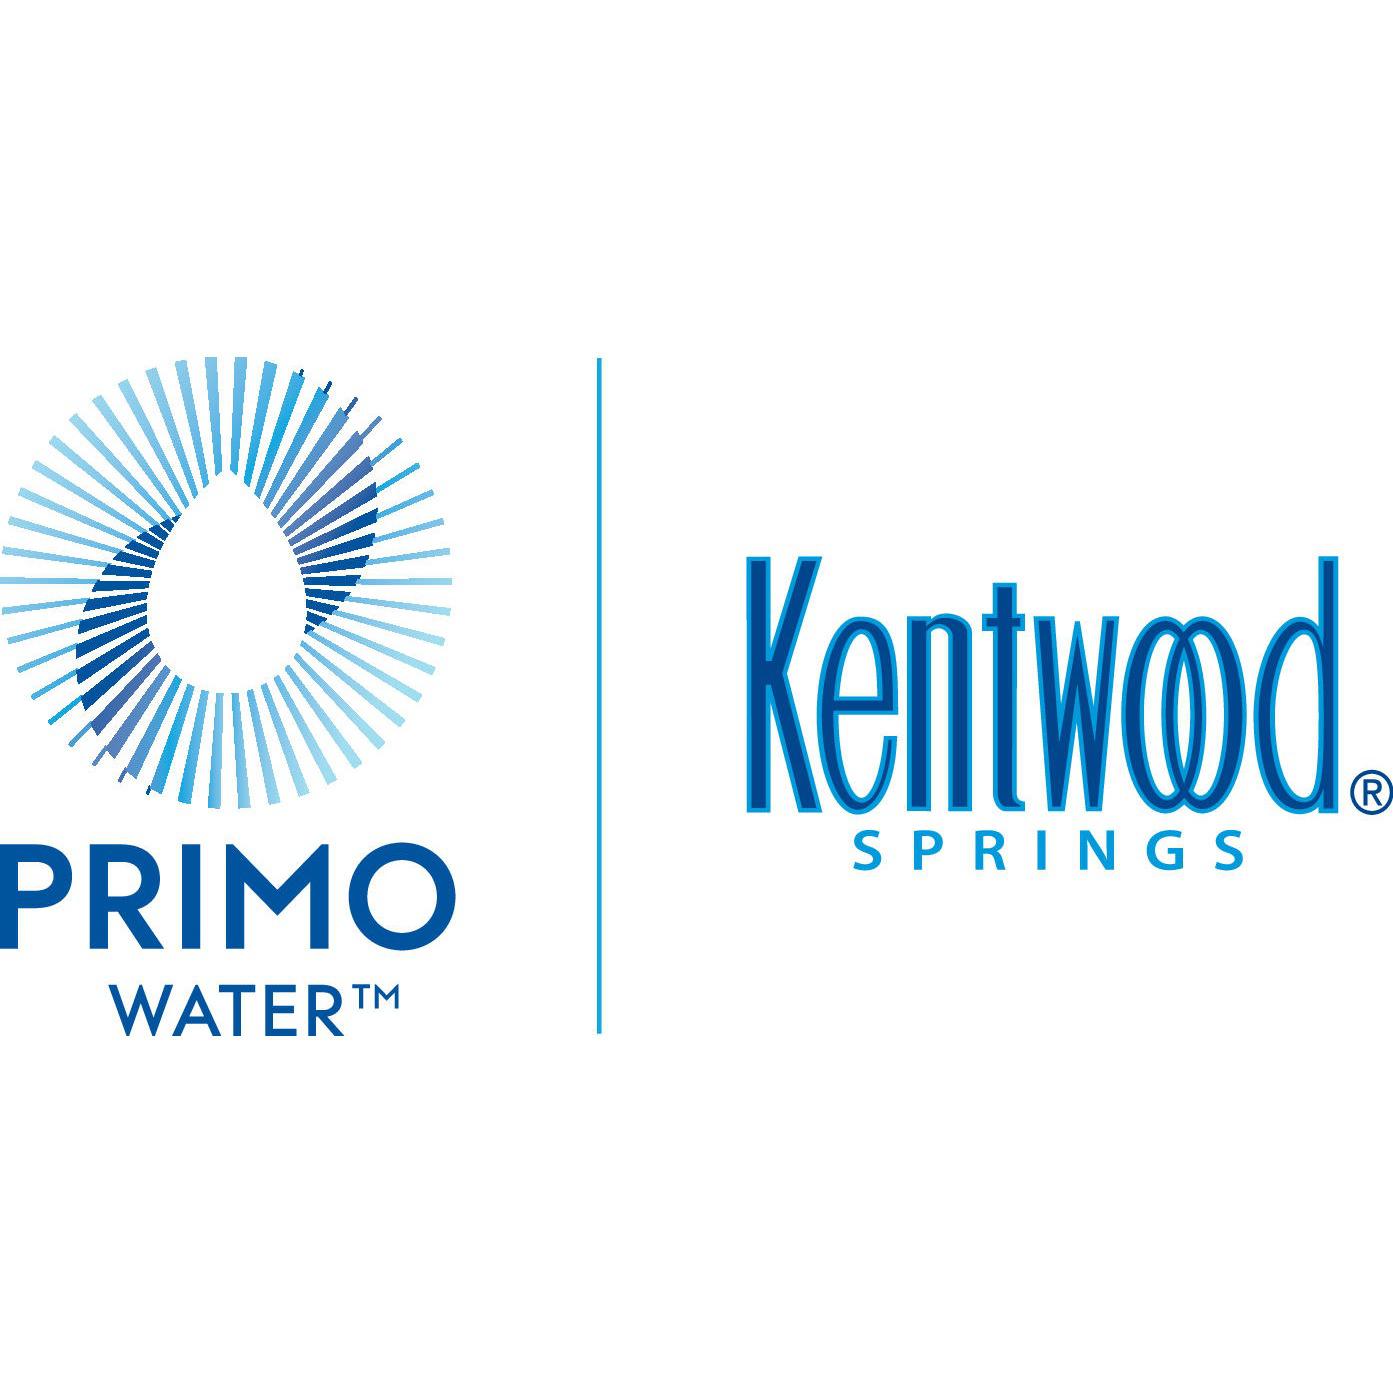 Kentwood Springs Water Delivery Service 2230 - Ridgeland, MS - (800)492-8377 | ShowMeLocal.com